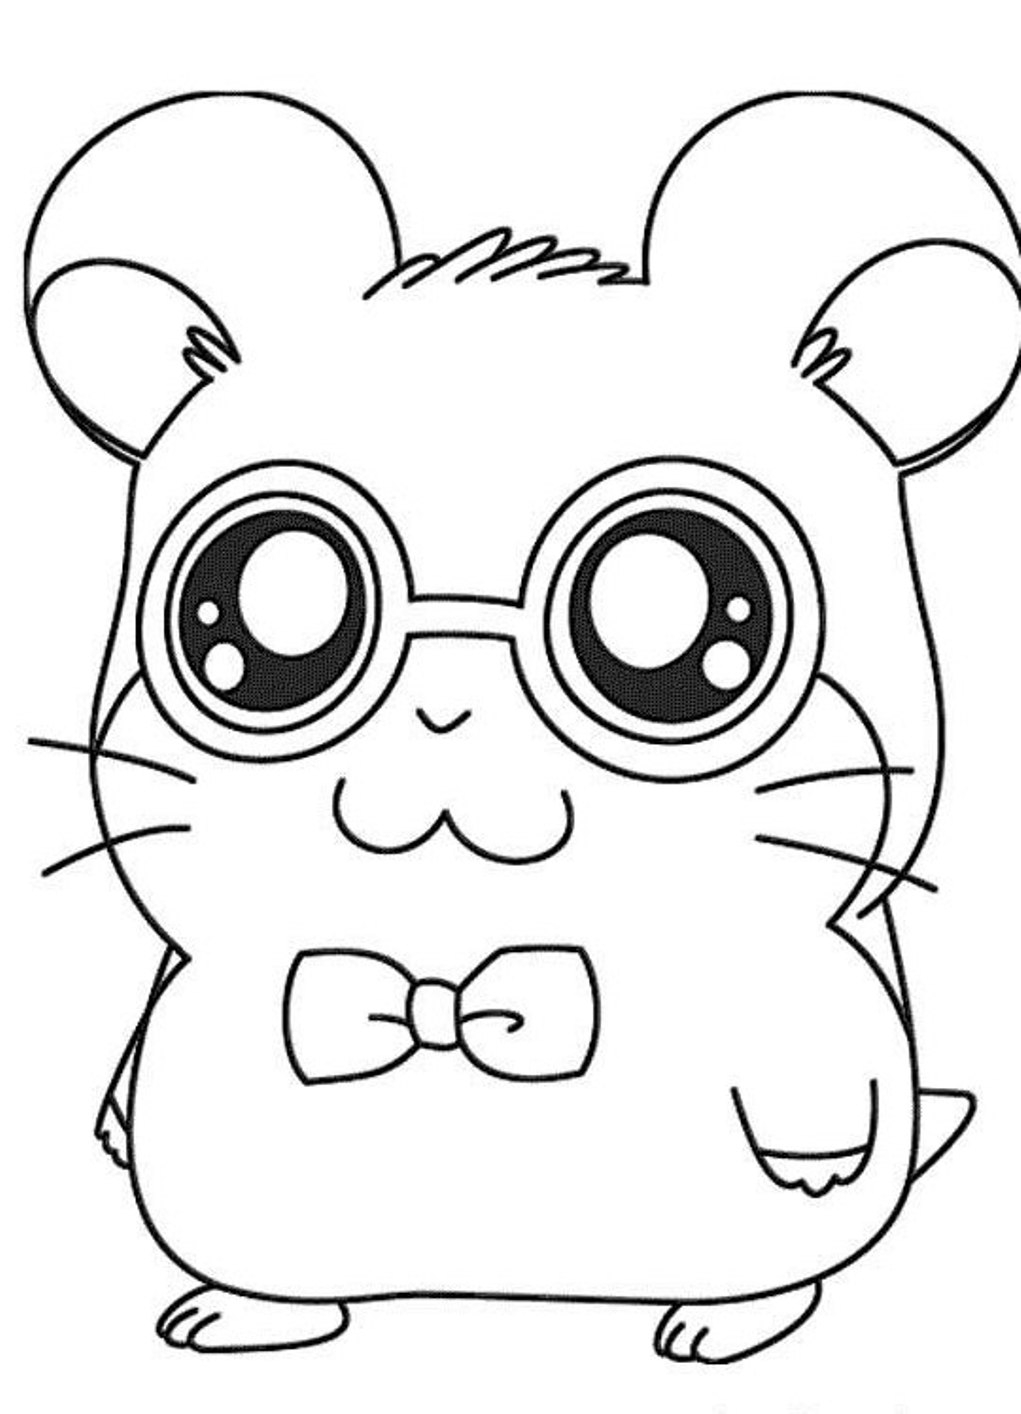 super-cute-coloring-pages-at-getcolorings-free-printable-colorings-pages-to-print-and-color